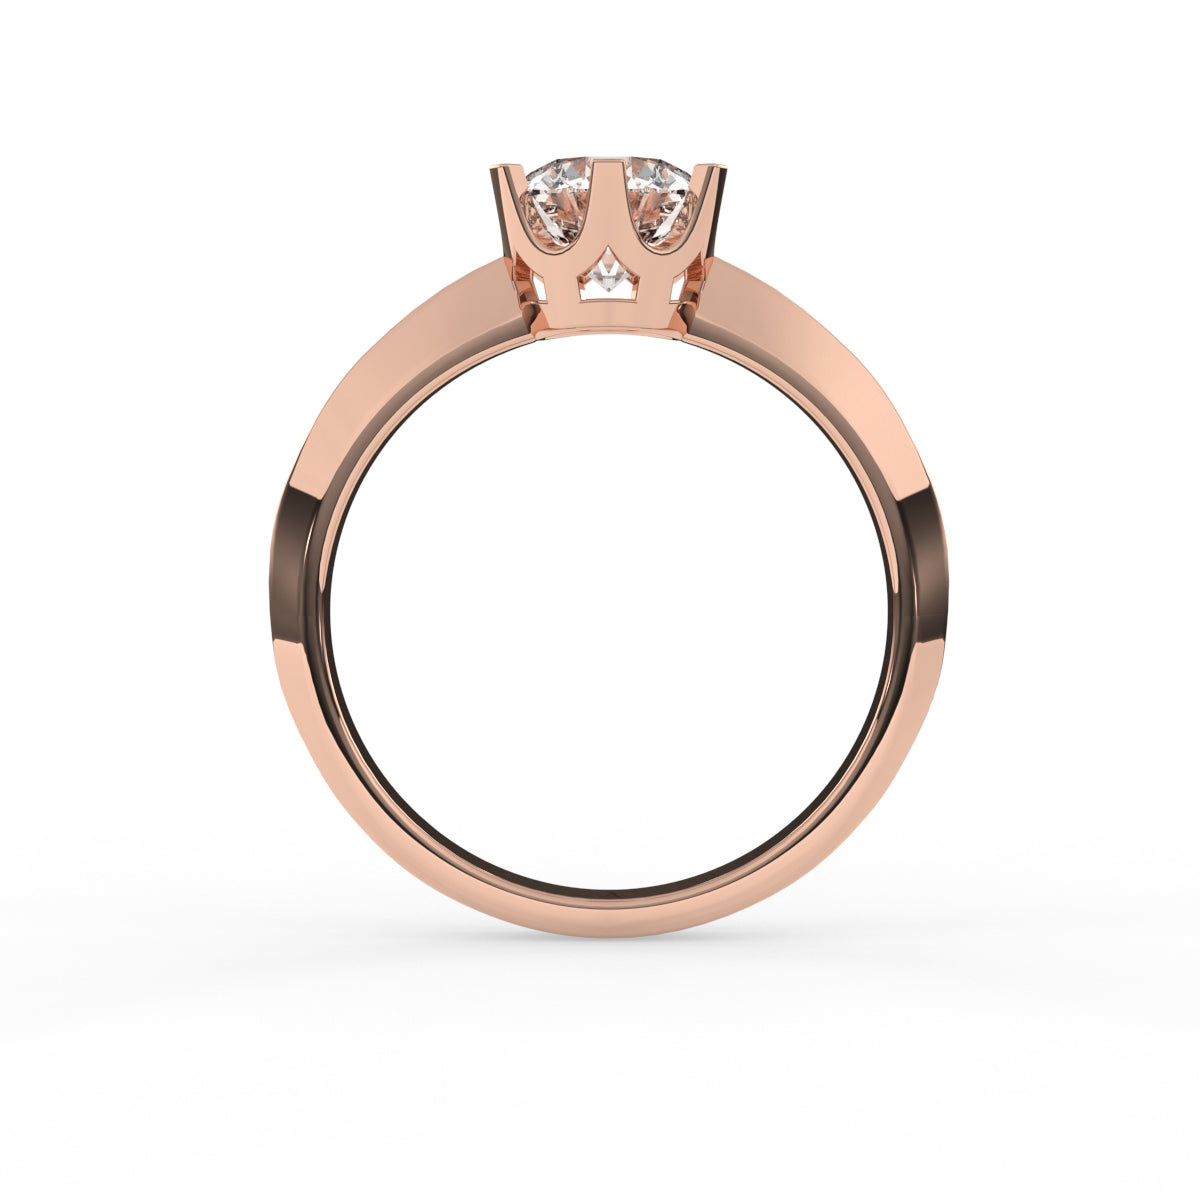 Solitaire knight edge ring